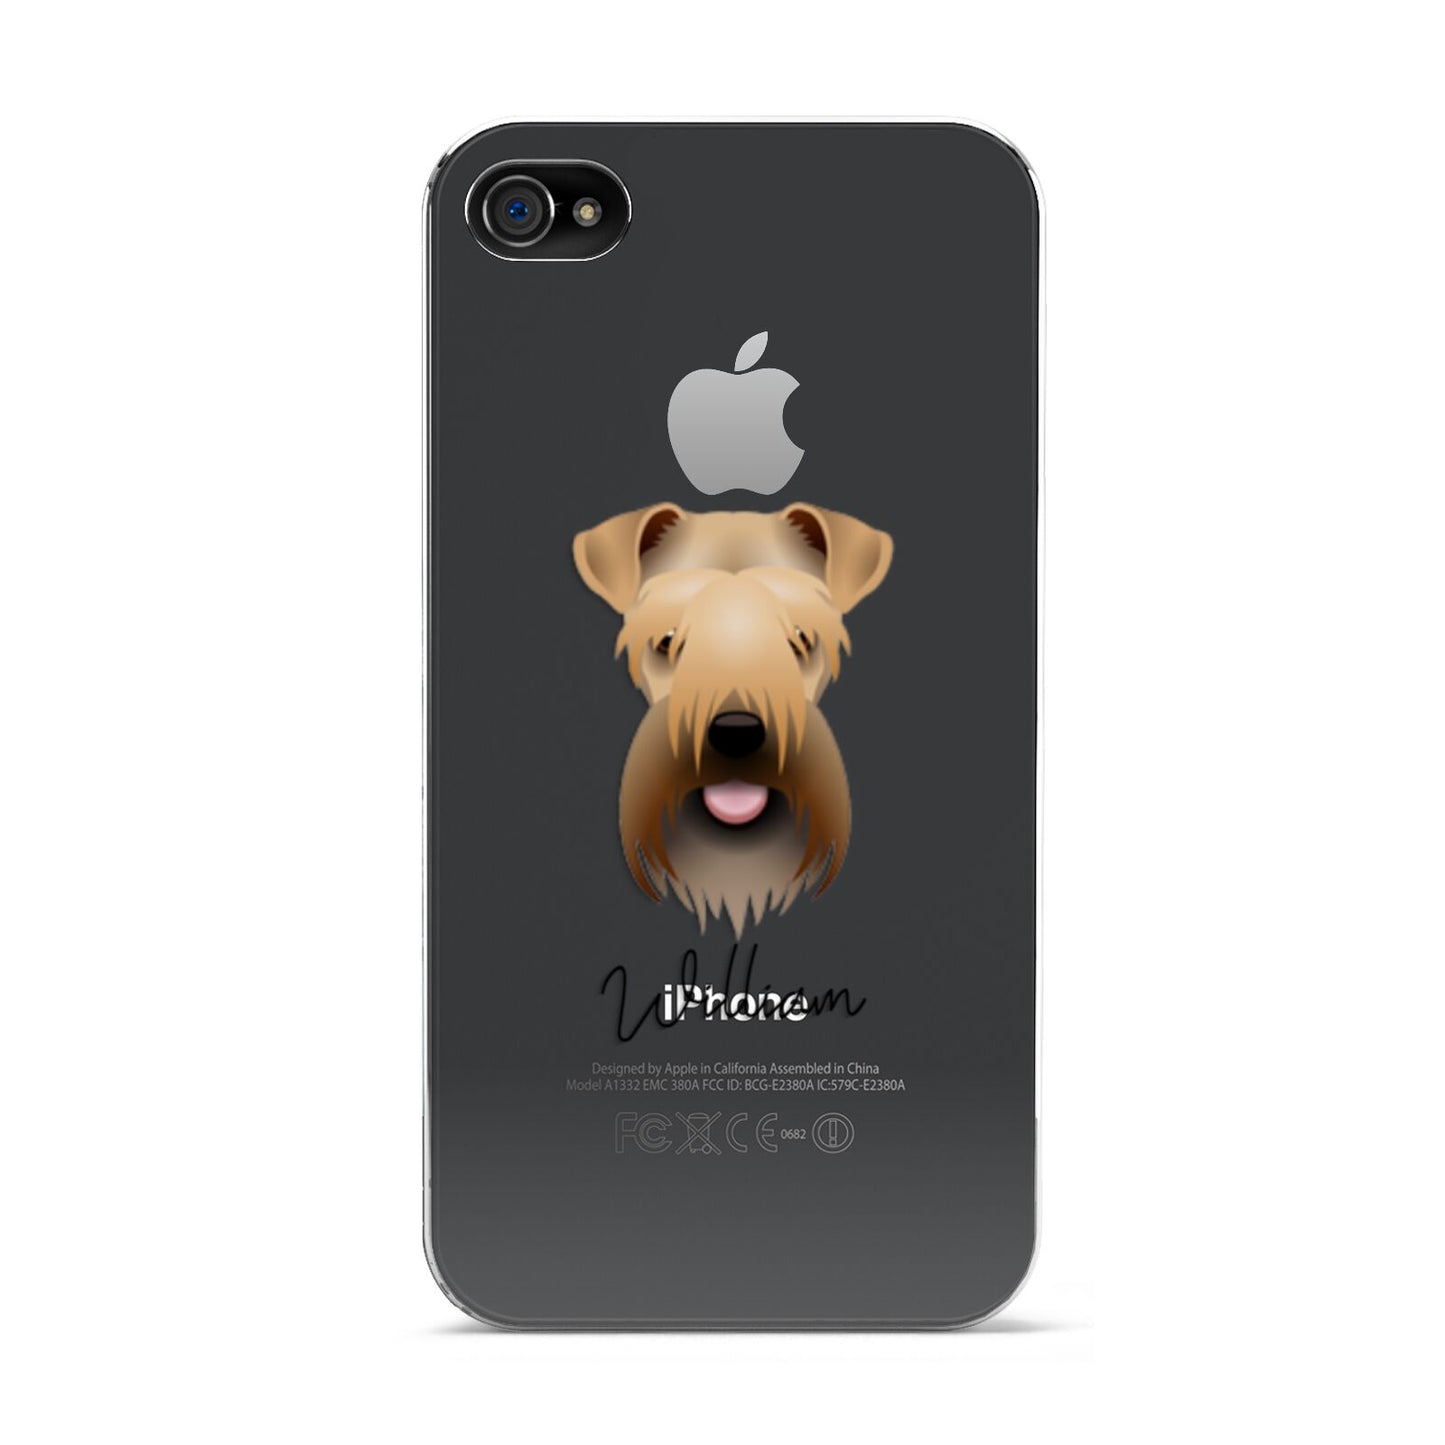 Soft Coated Wheaten Terrier Personalised Apple iPhone 4s Case